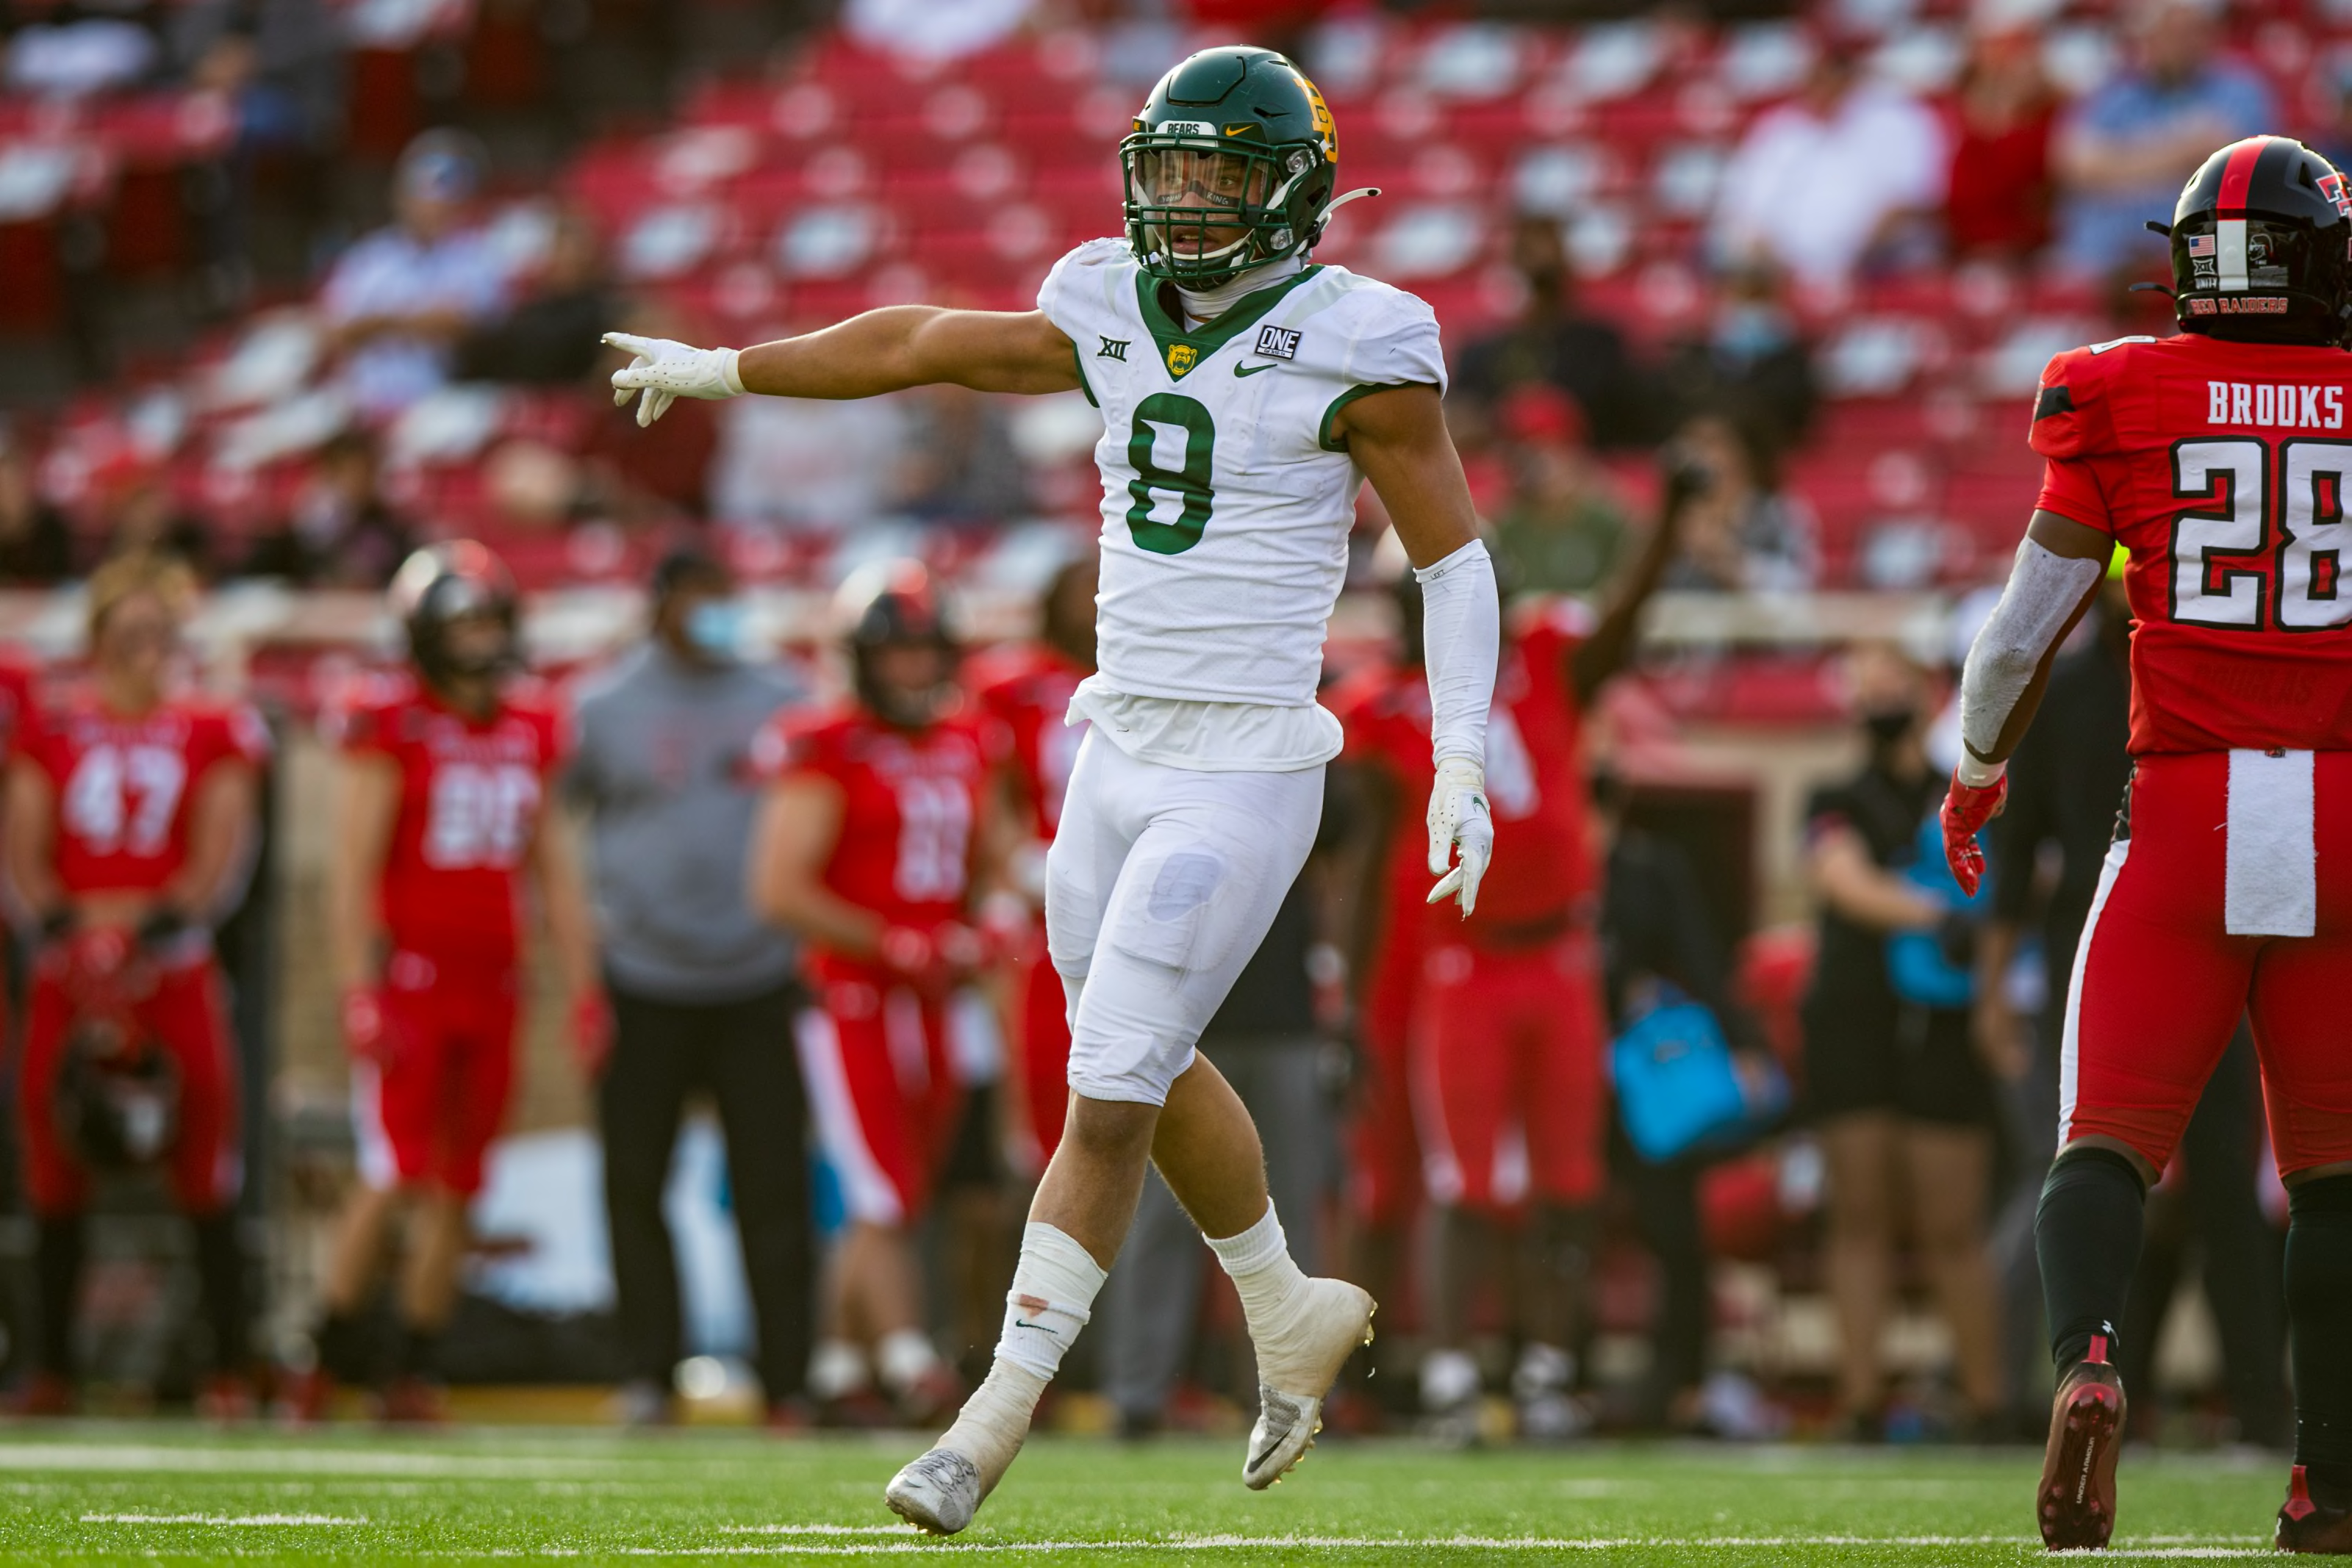 Baylor football: Top 5 prospects for 2022 NFL Draft - Page 3